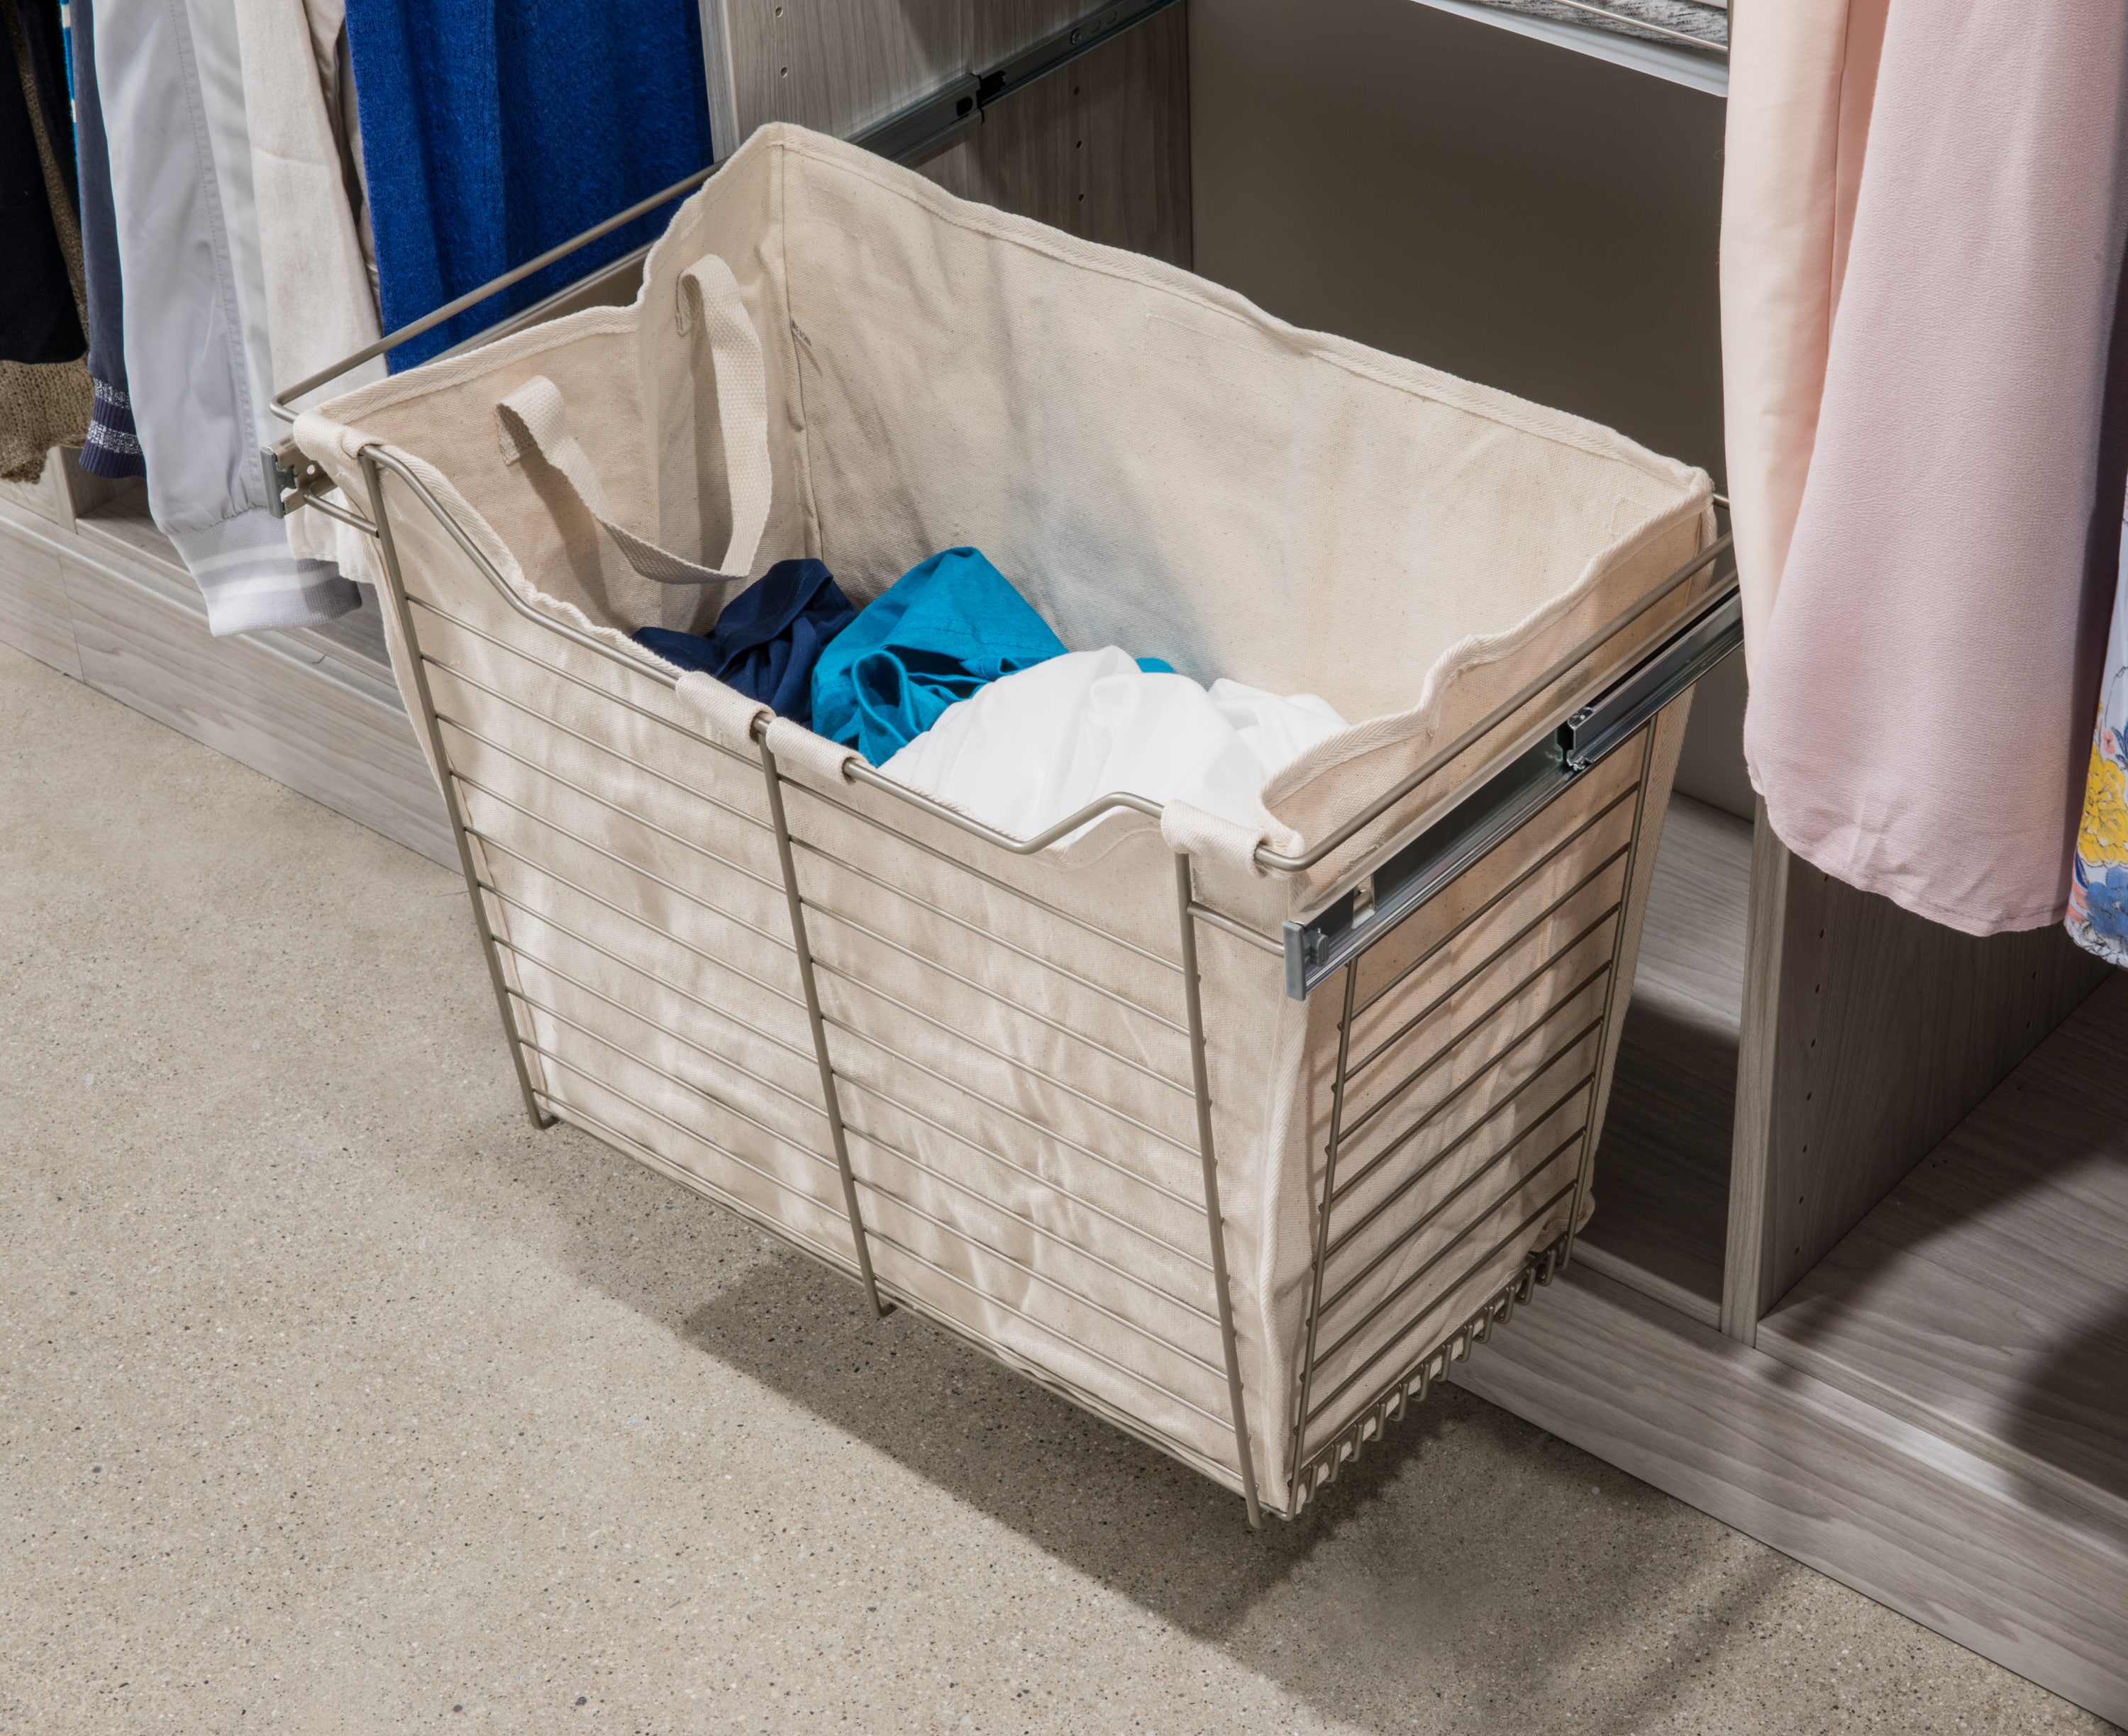 Drawer pulled out showing clothing hamper